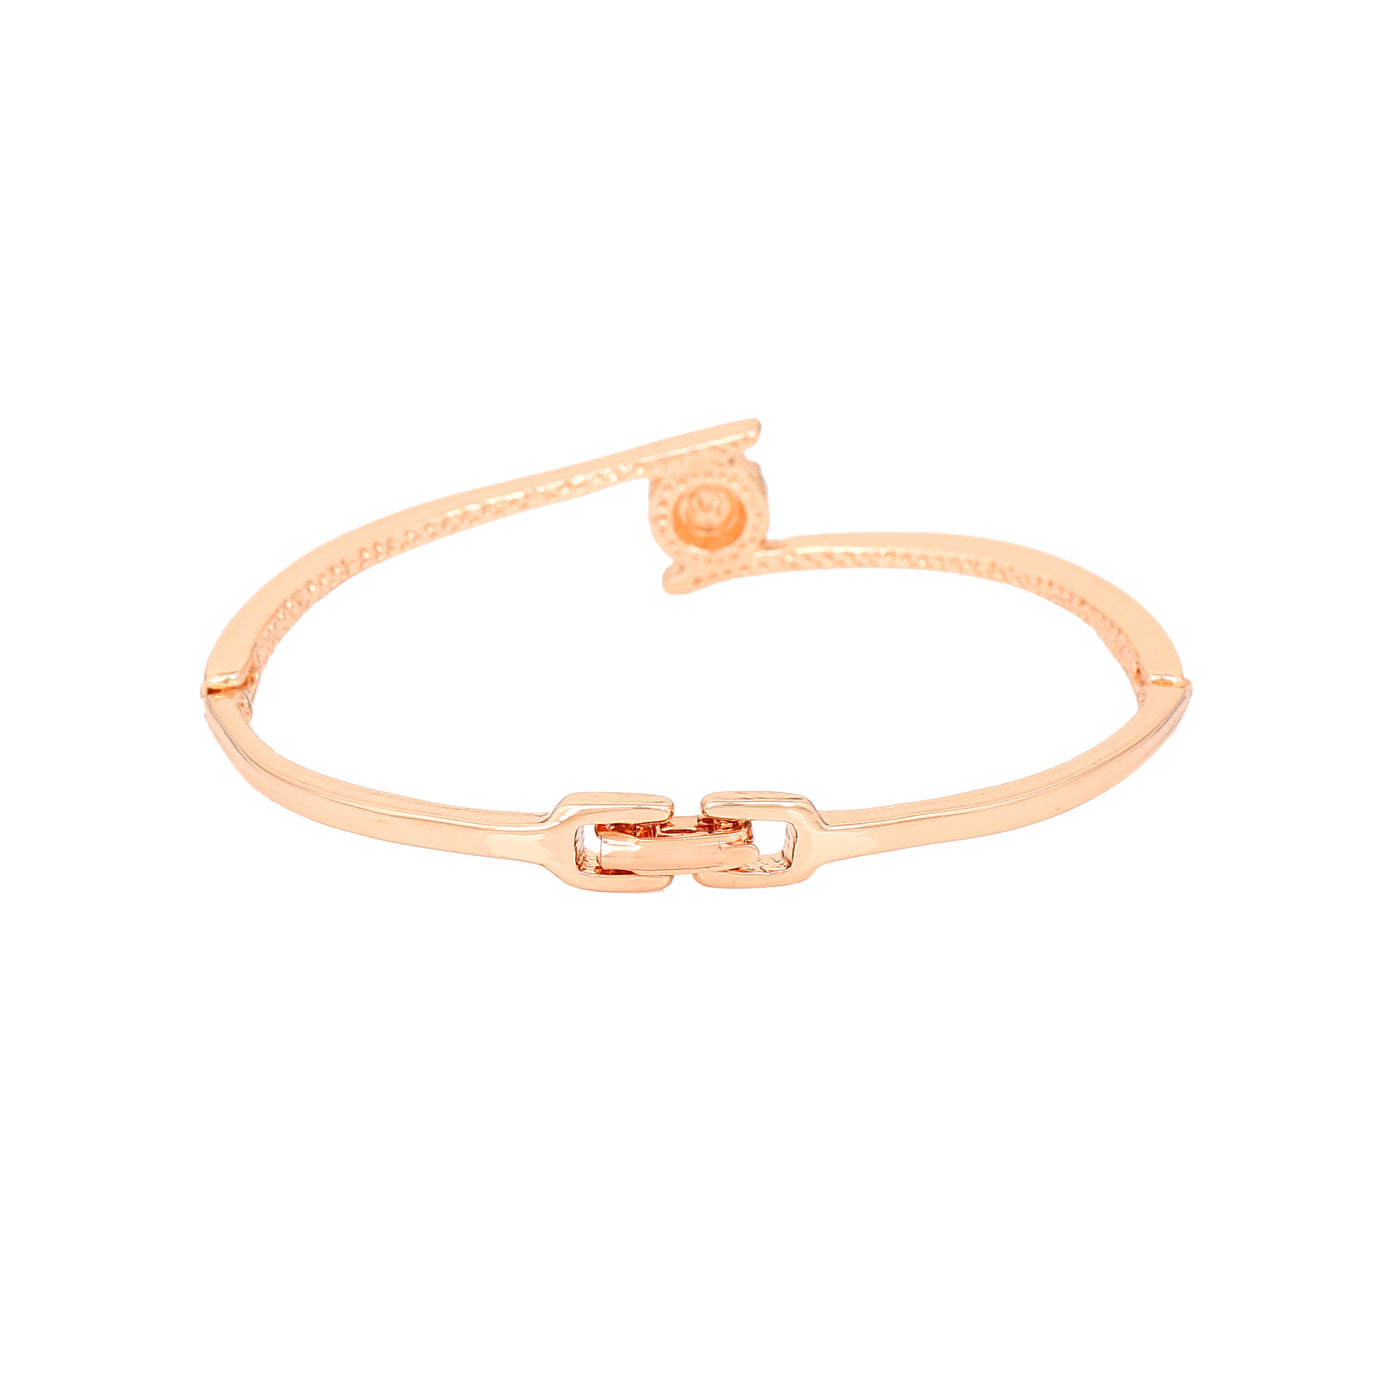 Estele Rose Gold Plated Beautiful Cuff Bracelet with crystals for Women